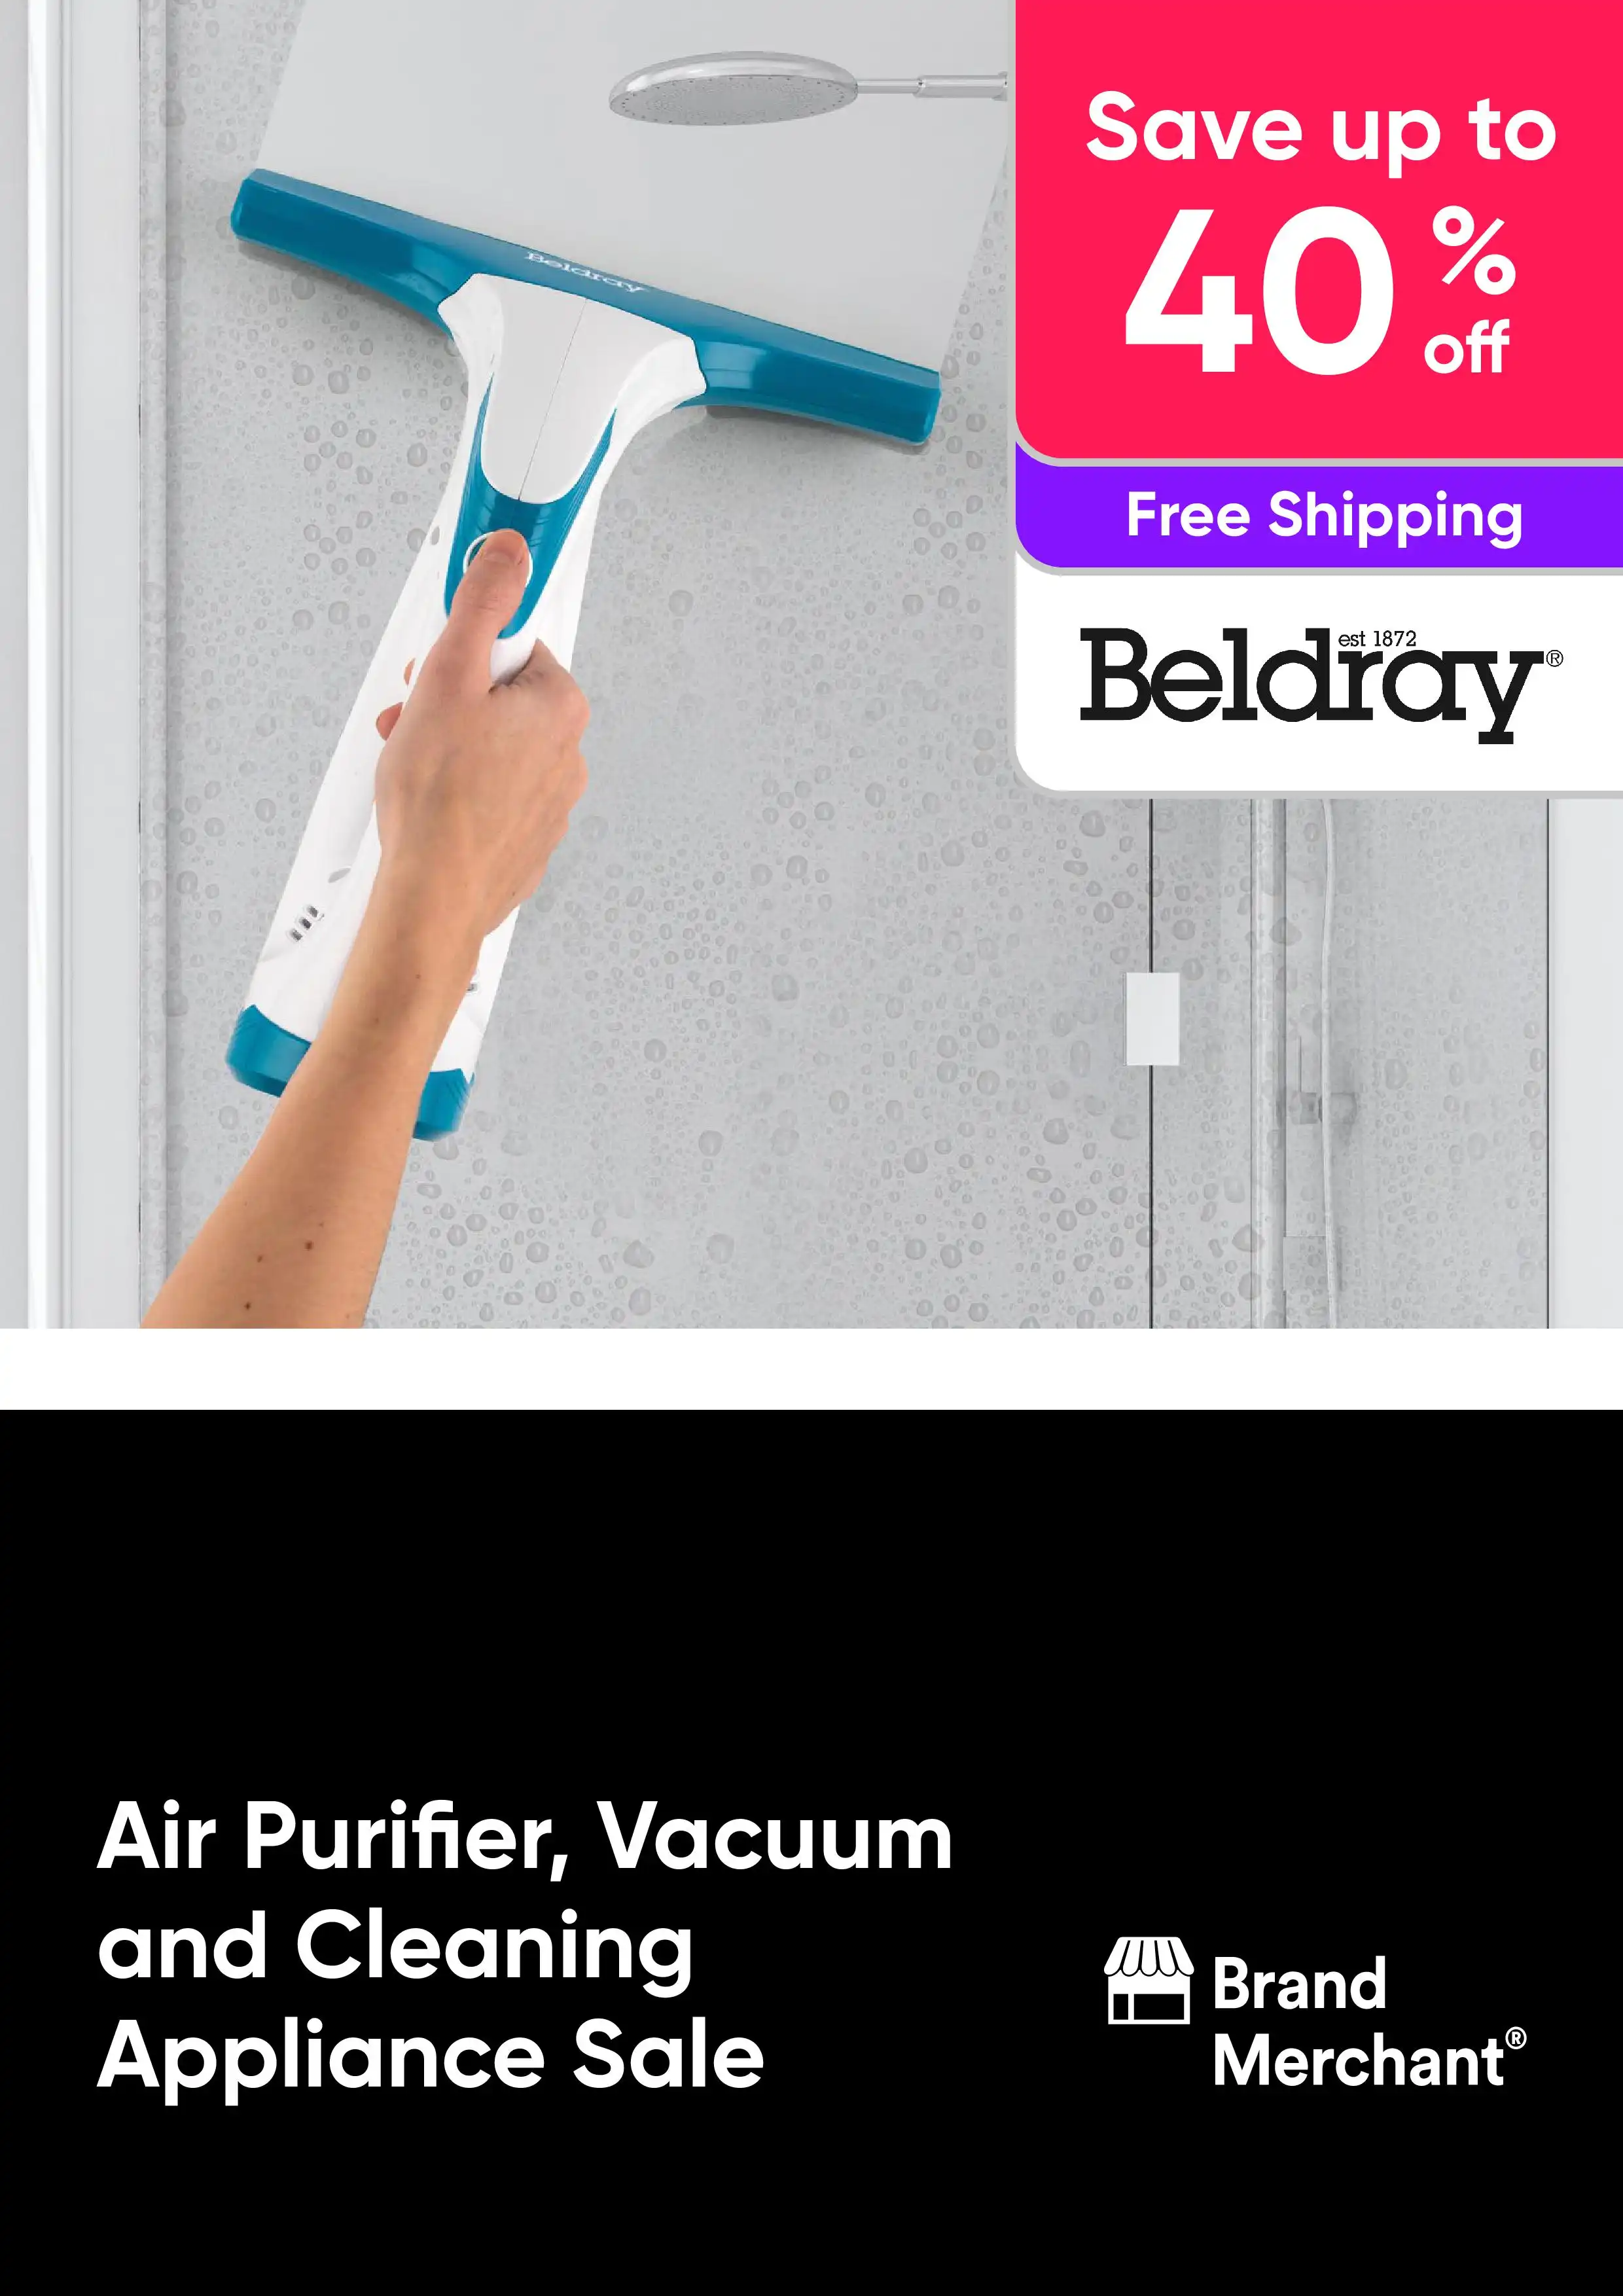 Air Purifier, Vacuum and Cleaning Appliance Sale - Beldray - up to 40% off